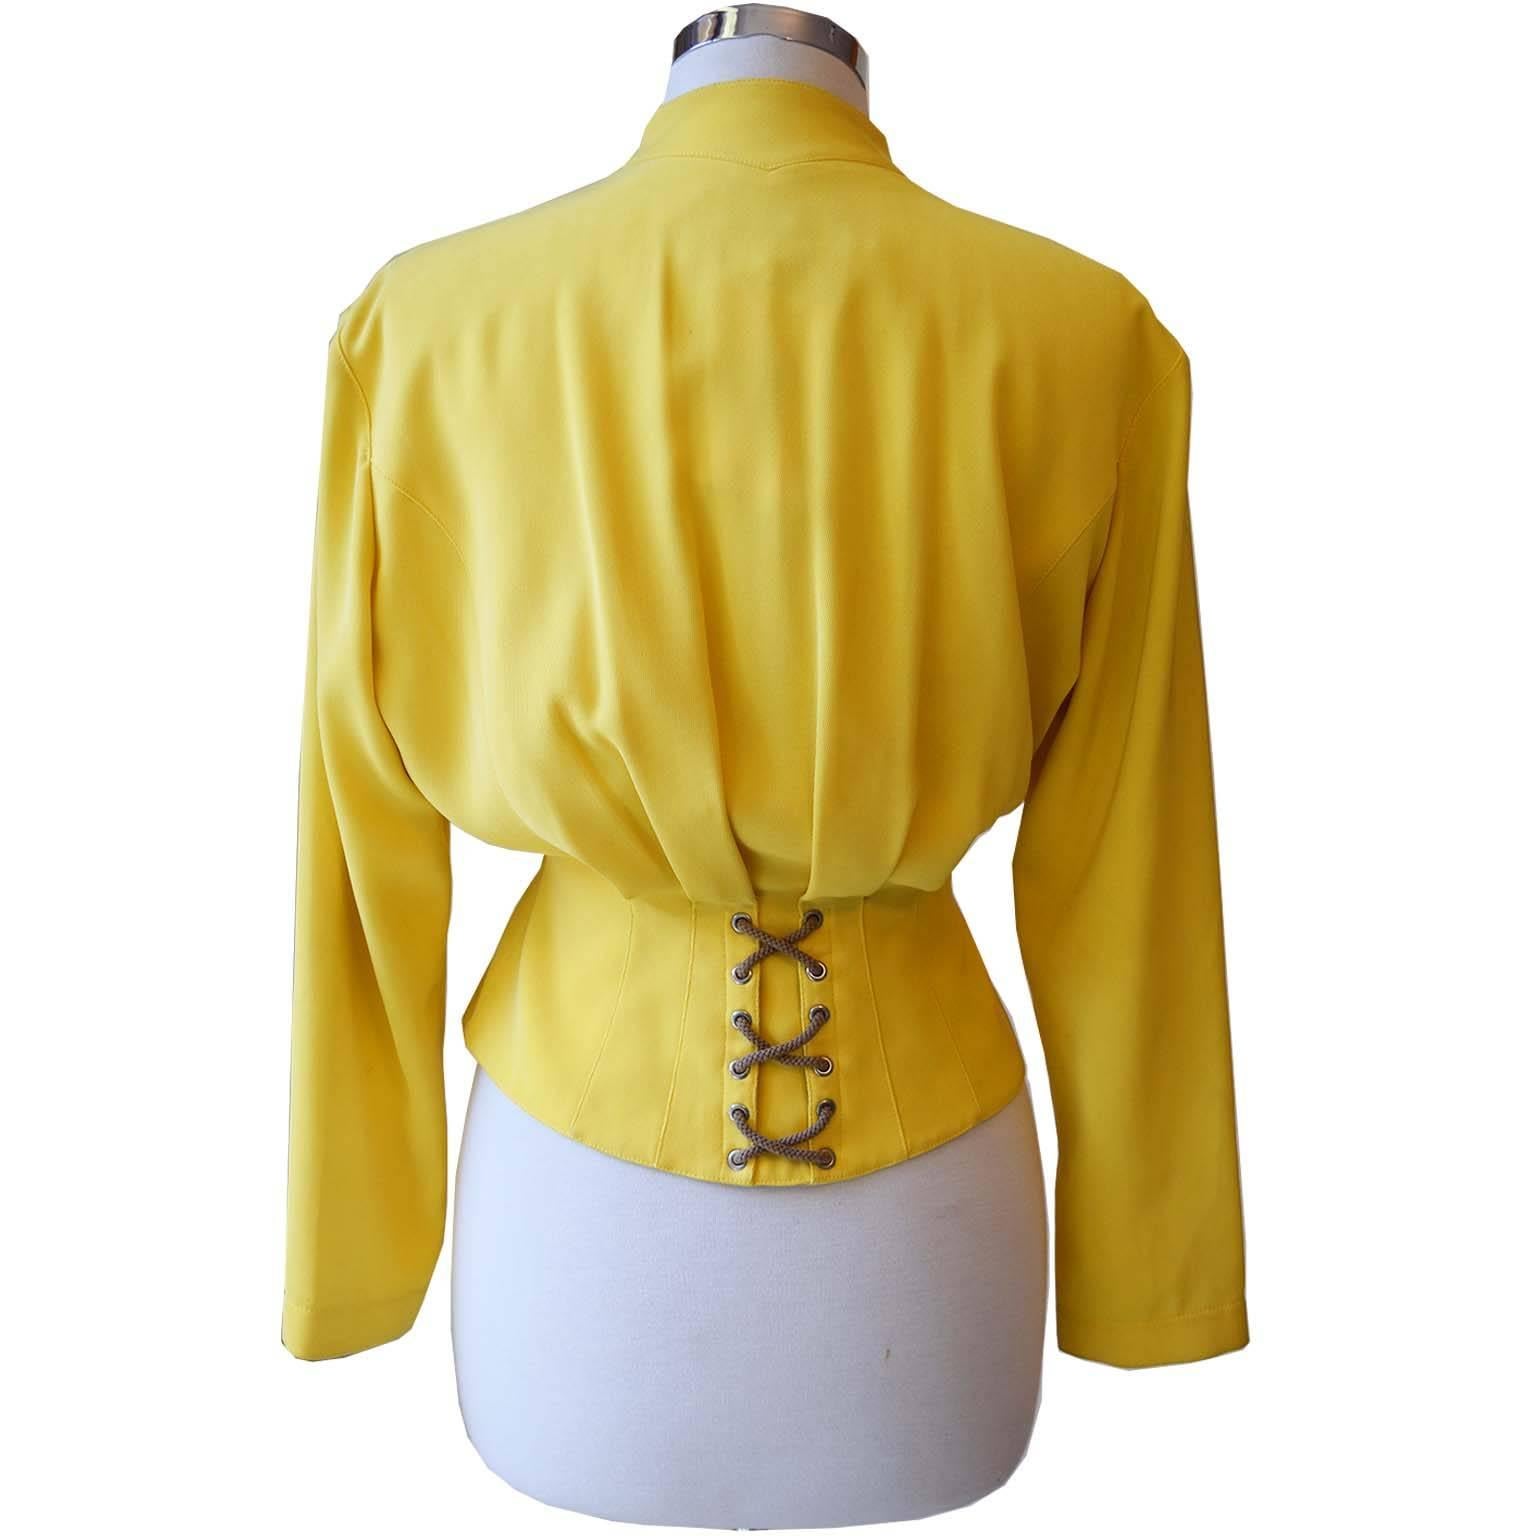 Thierry Mugler iconic canary yellow jacket with criss-cross rope detail on shoulders, front, & back. Snap button closure. Vintage Mugler from 1990s was showcased heavily on Kim Catrall's character, Samantha Jones in 'Sex & the city'. Loose upperbody